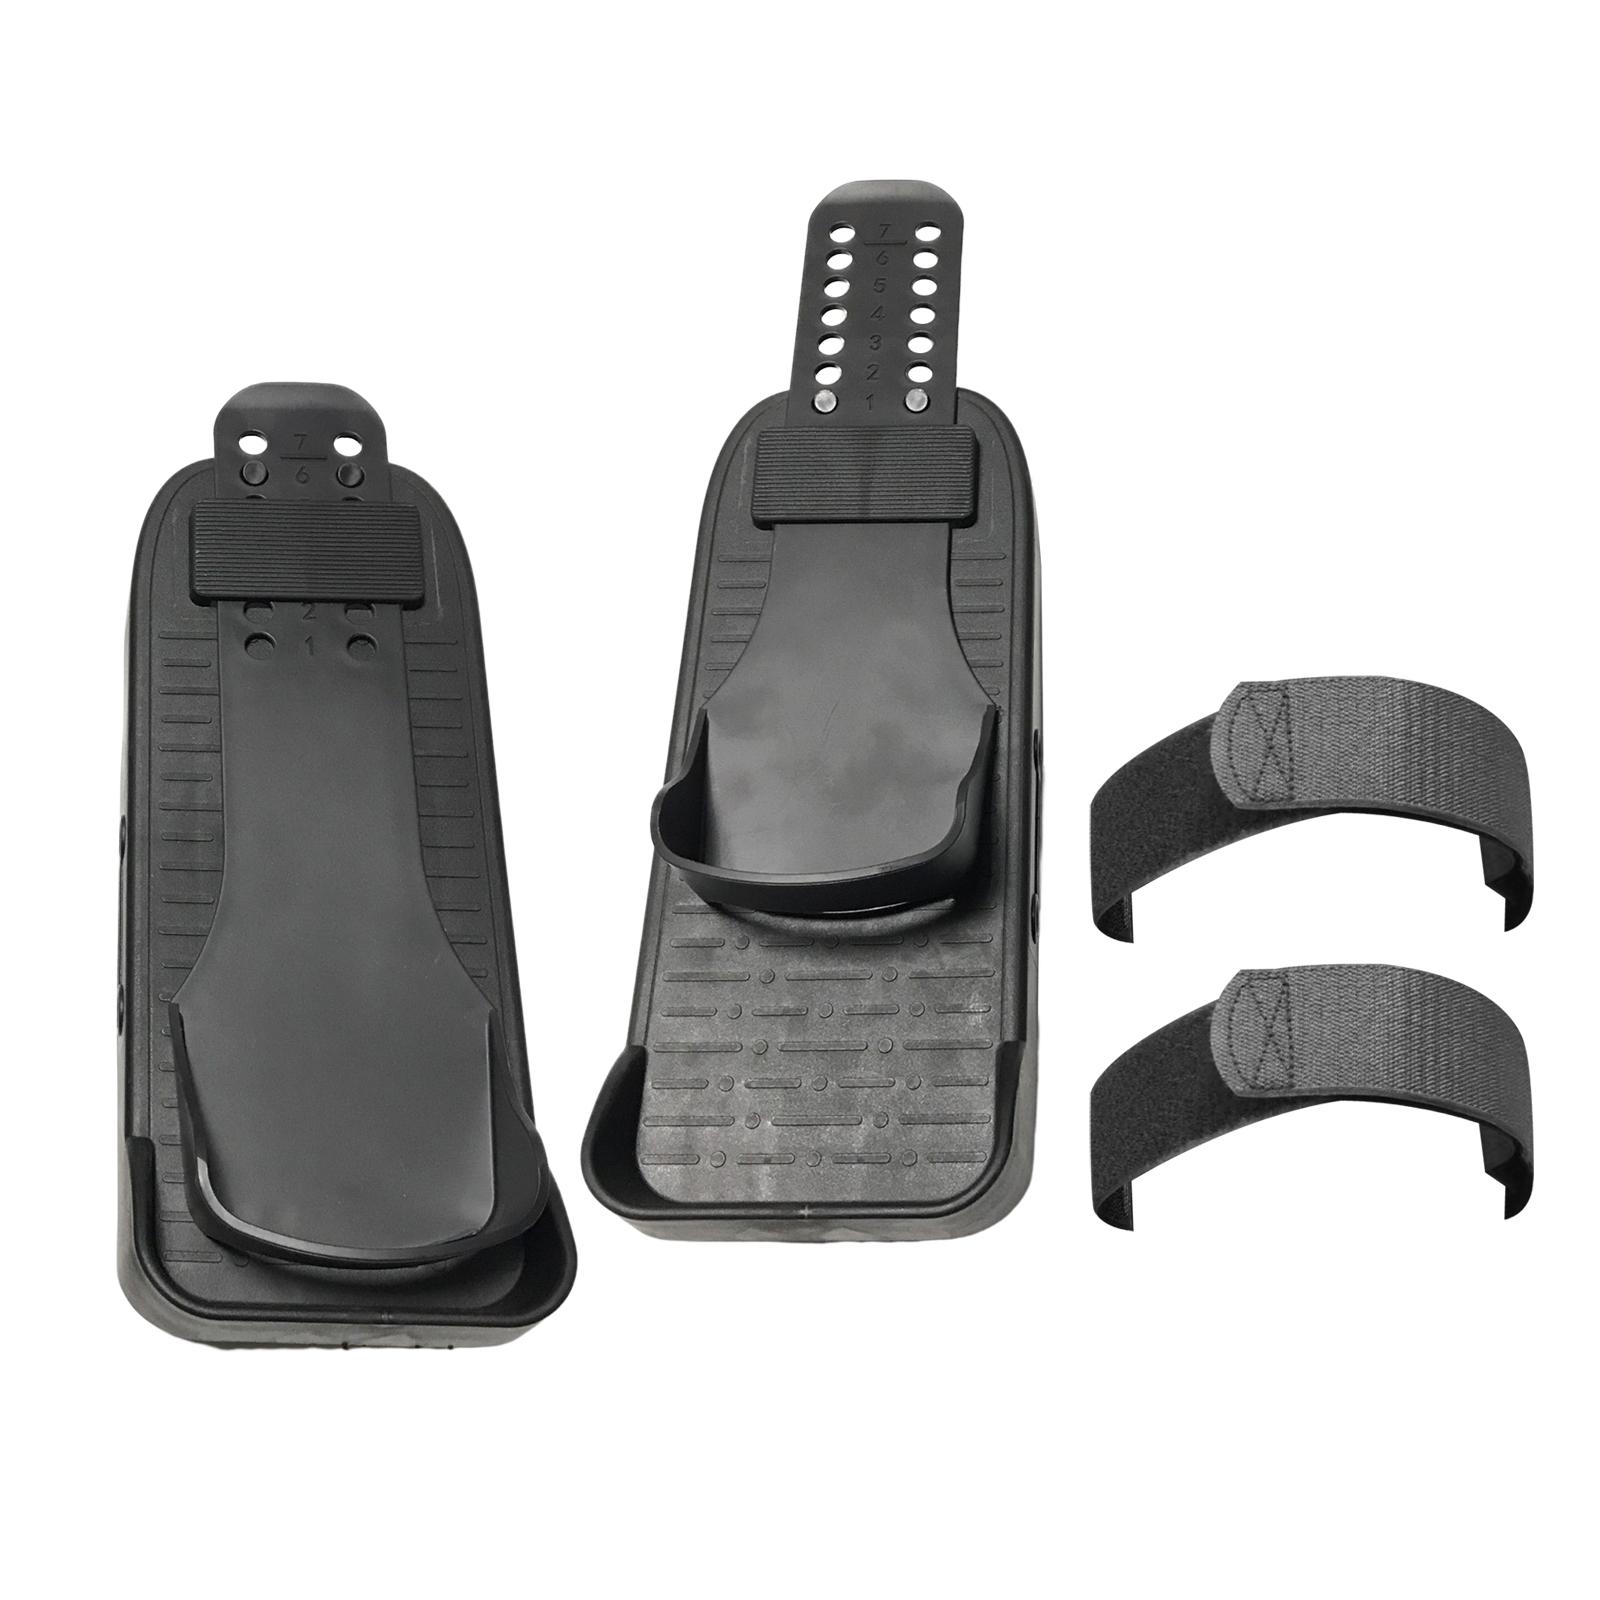 Rowing Machine Replacement Foot Pedals Rowing Machine Stationary Pedals for Horse Riding Machine